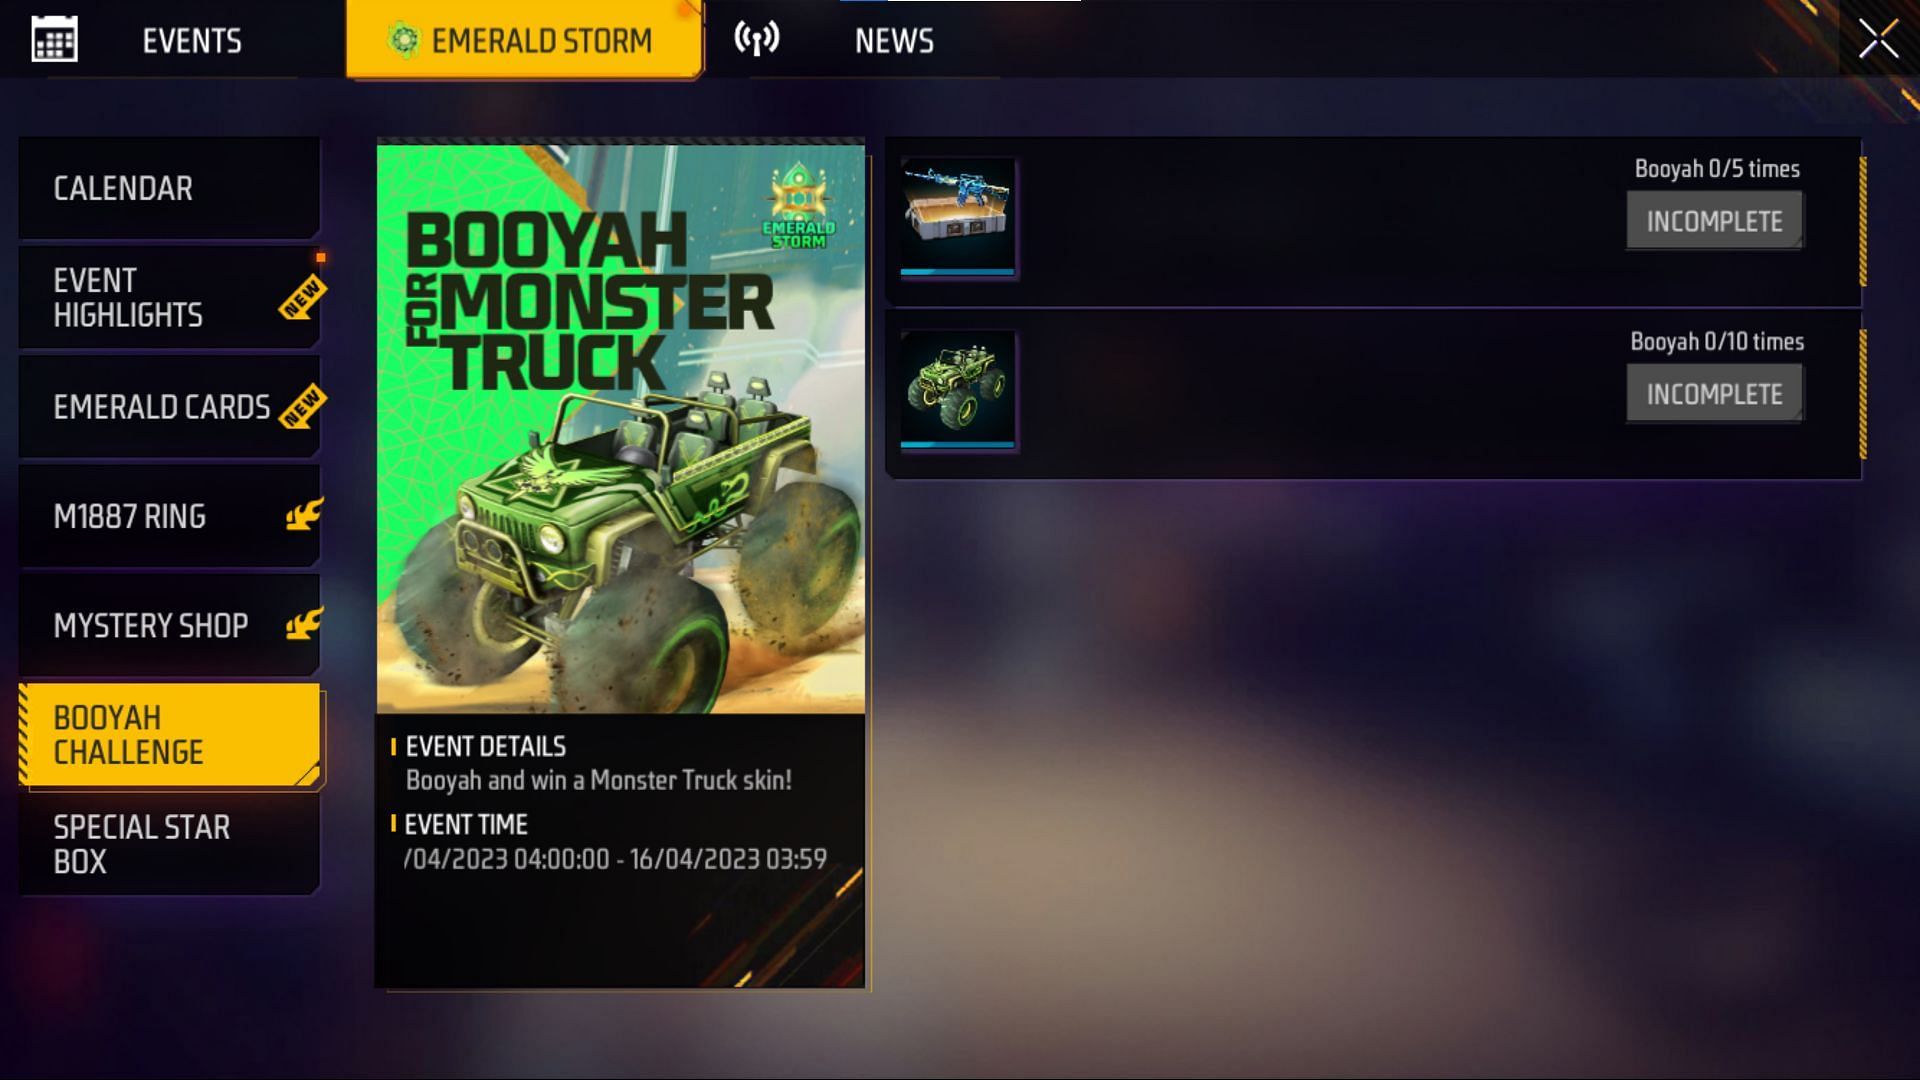 The tasks of the new Booyah Challenge are pretty easy to complete (Image via Garena)